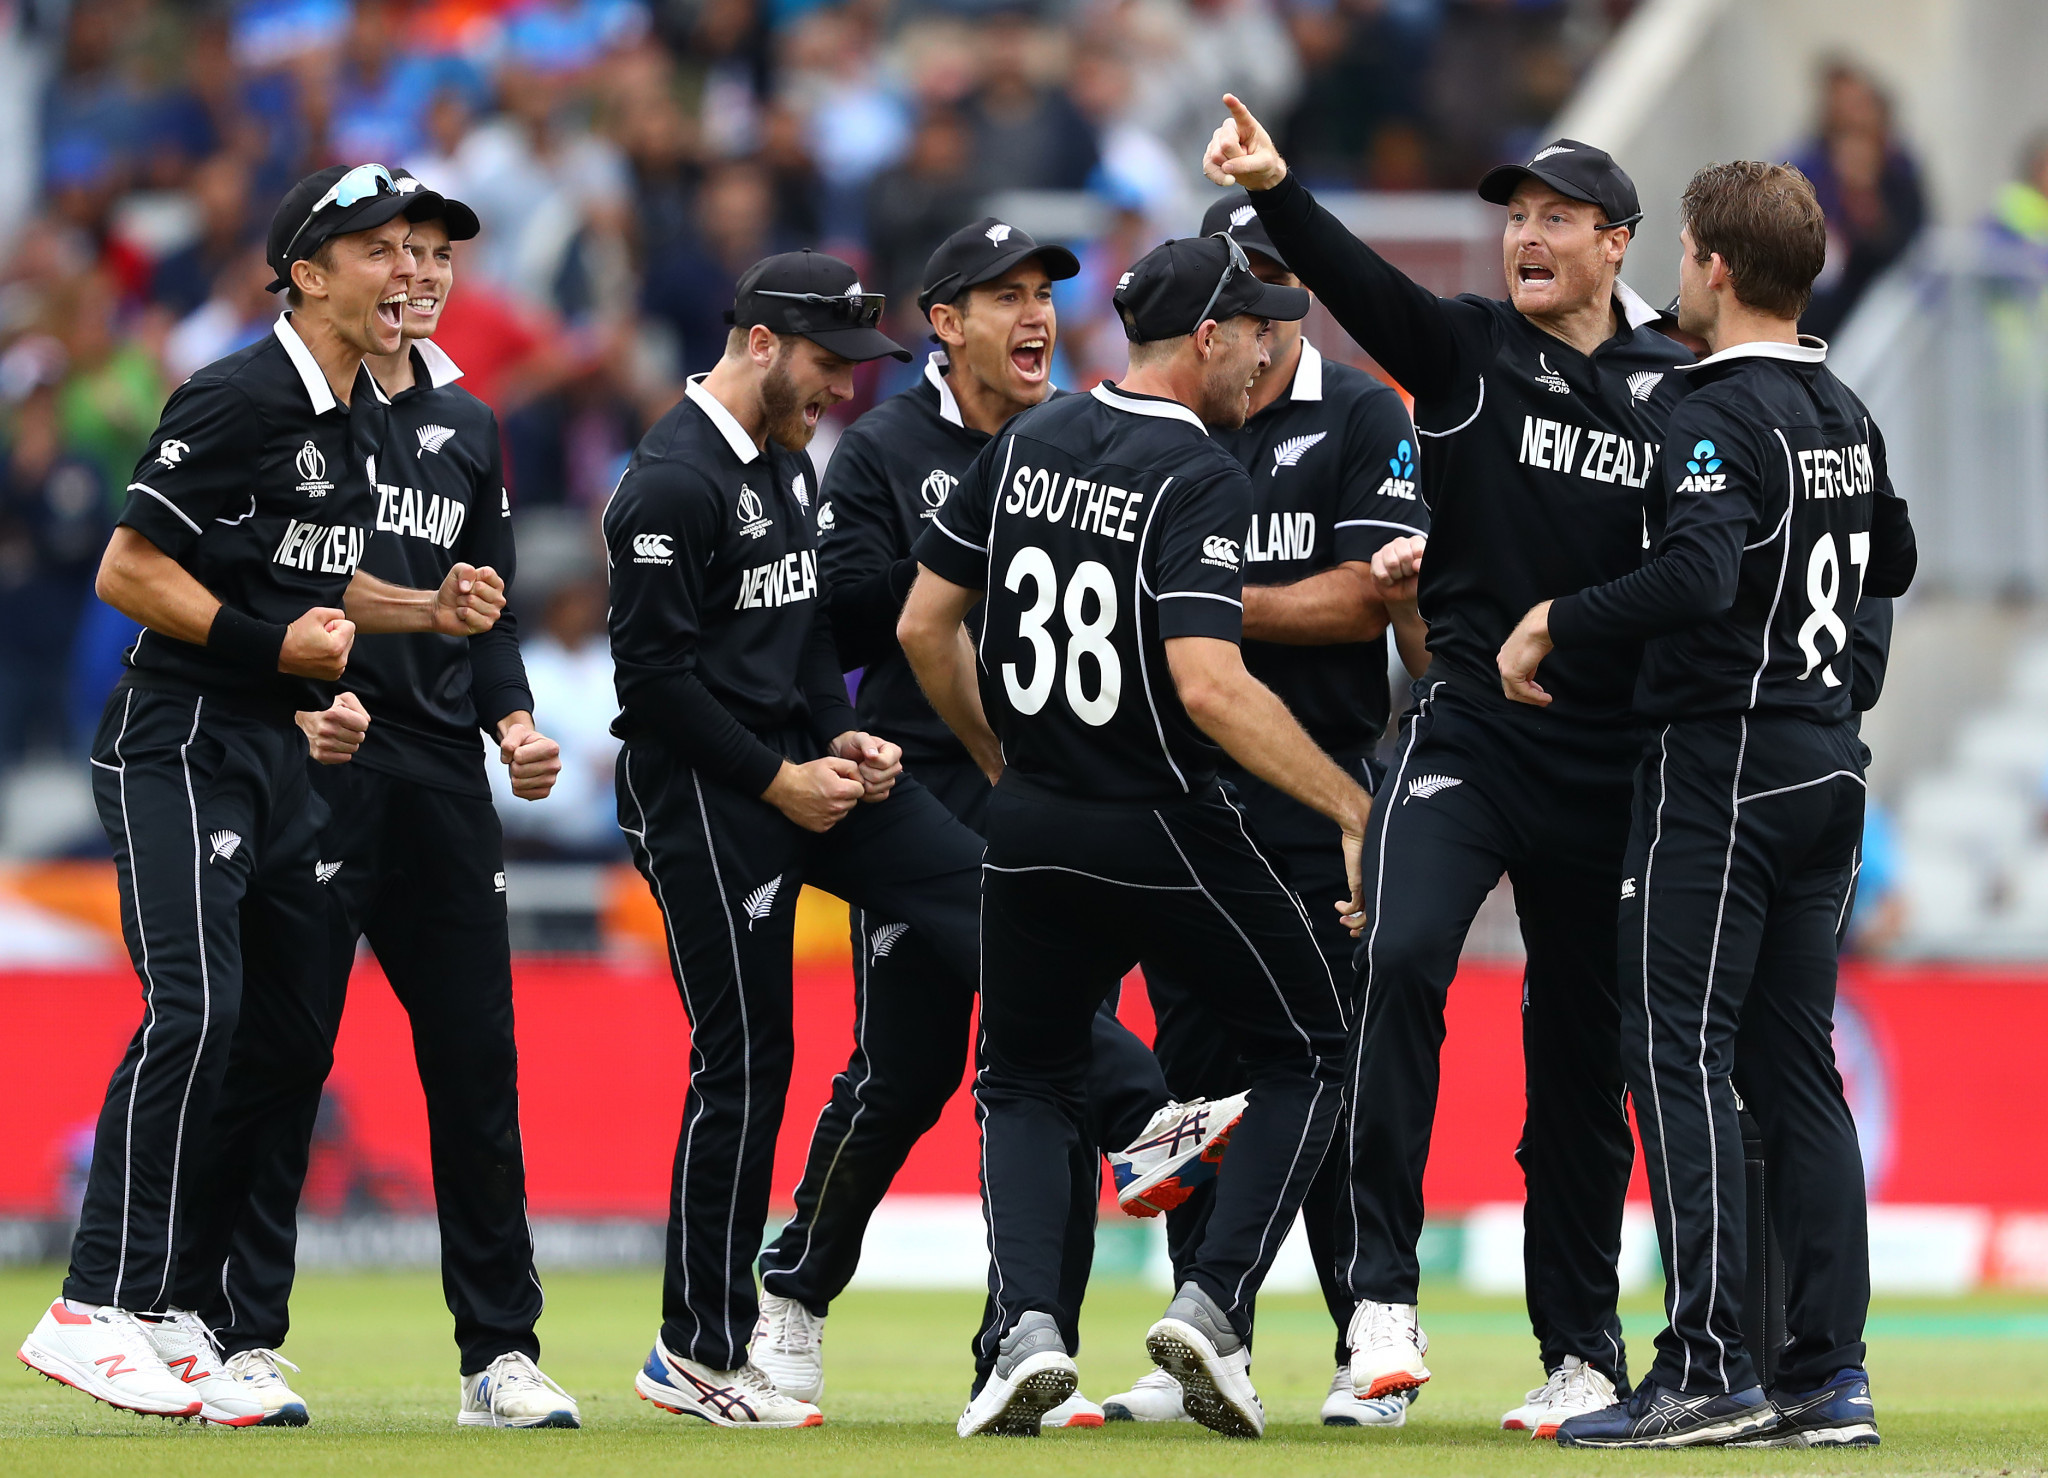 New Zealand upset India with thrilling victory to reach ICC Cricket World Cup final